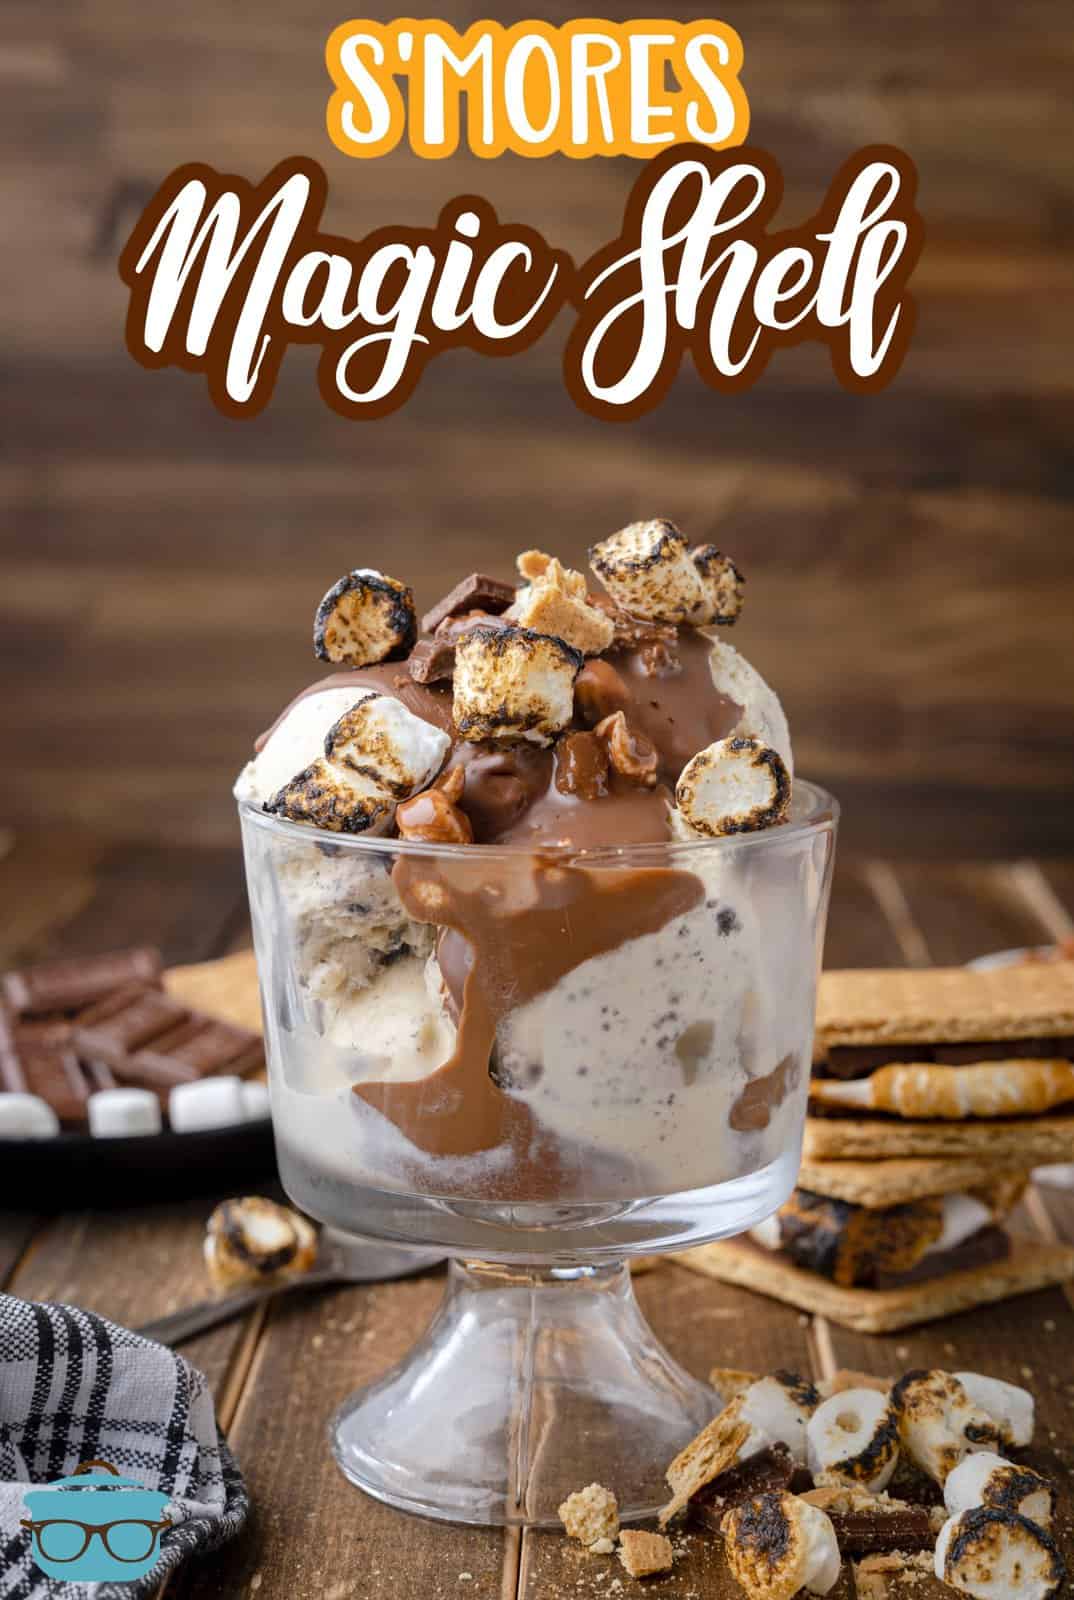 Pinterest image of S'mores Magic Shell in parfait glass dish over ice cream.